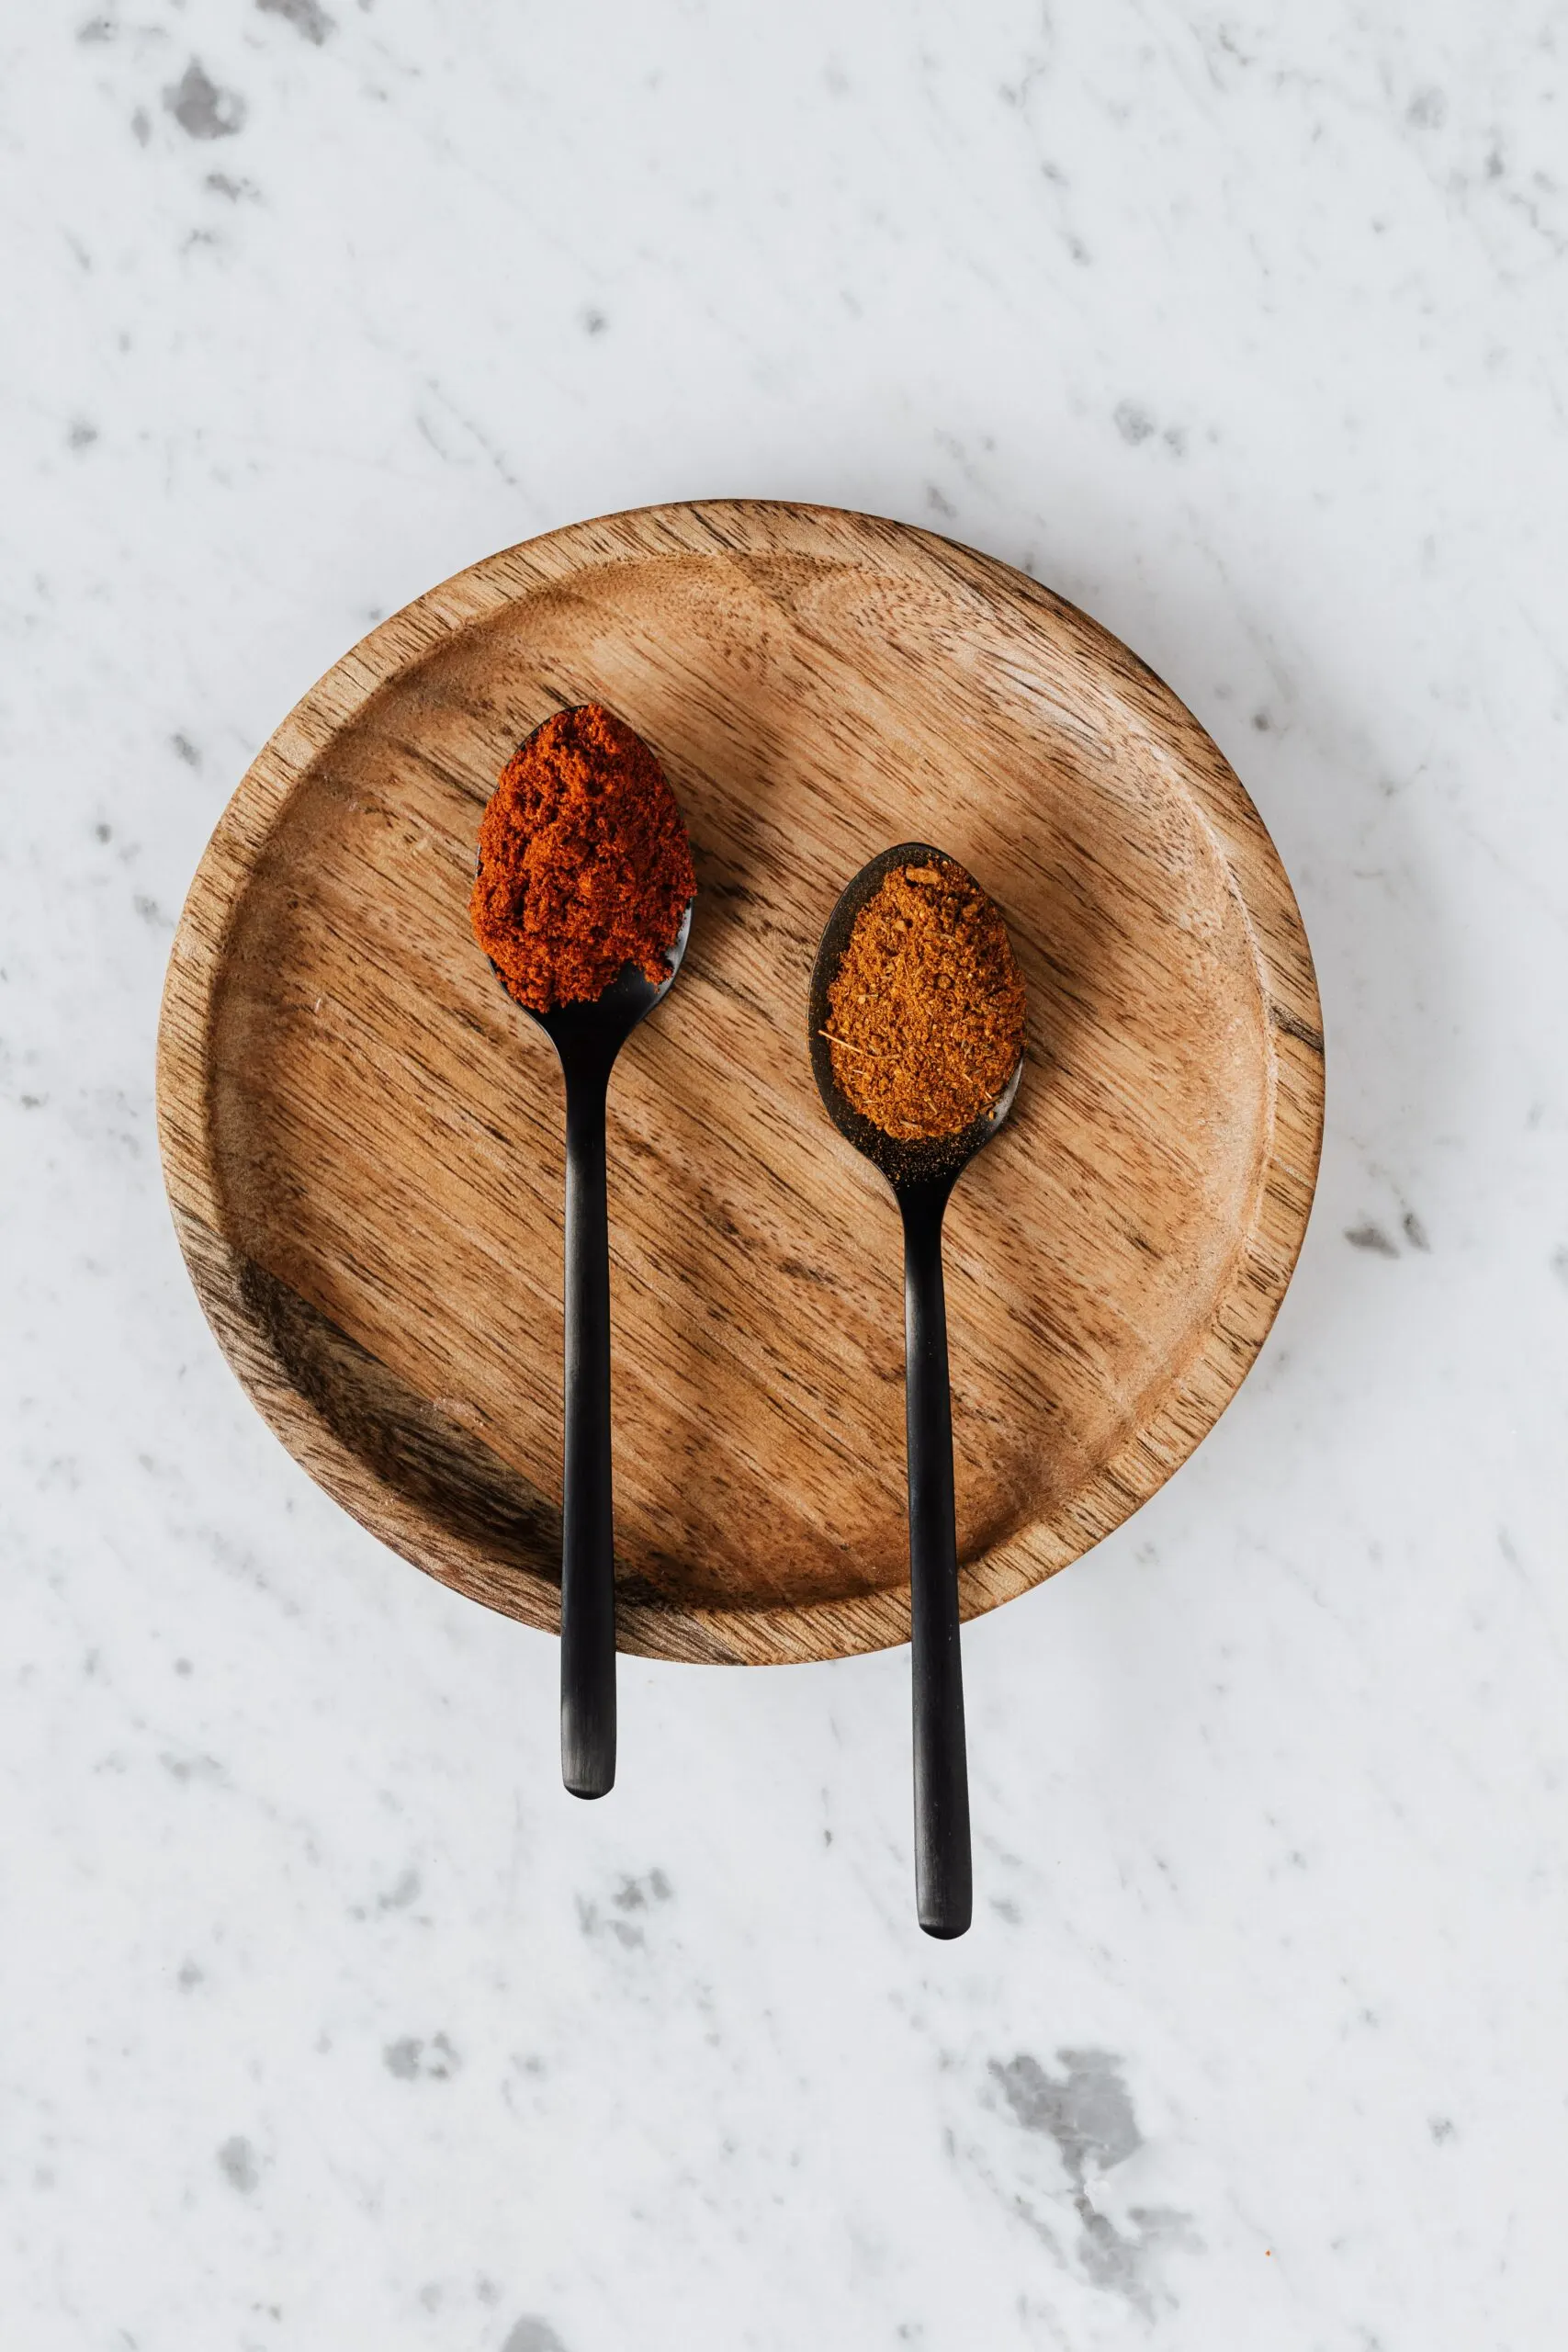 Two kinds of paprika on two spoons.